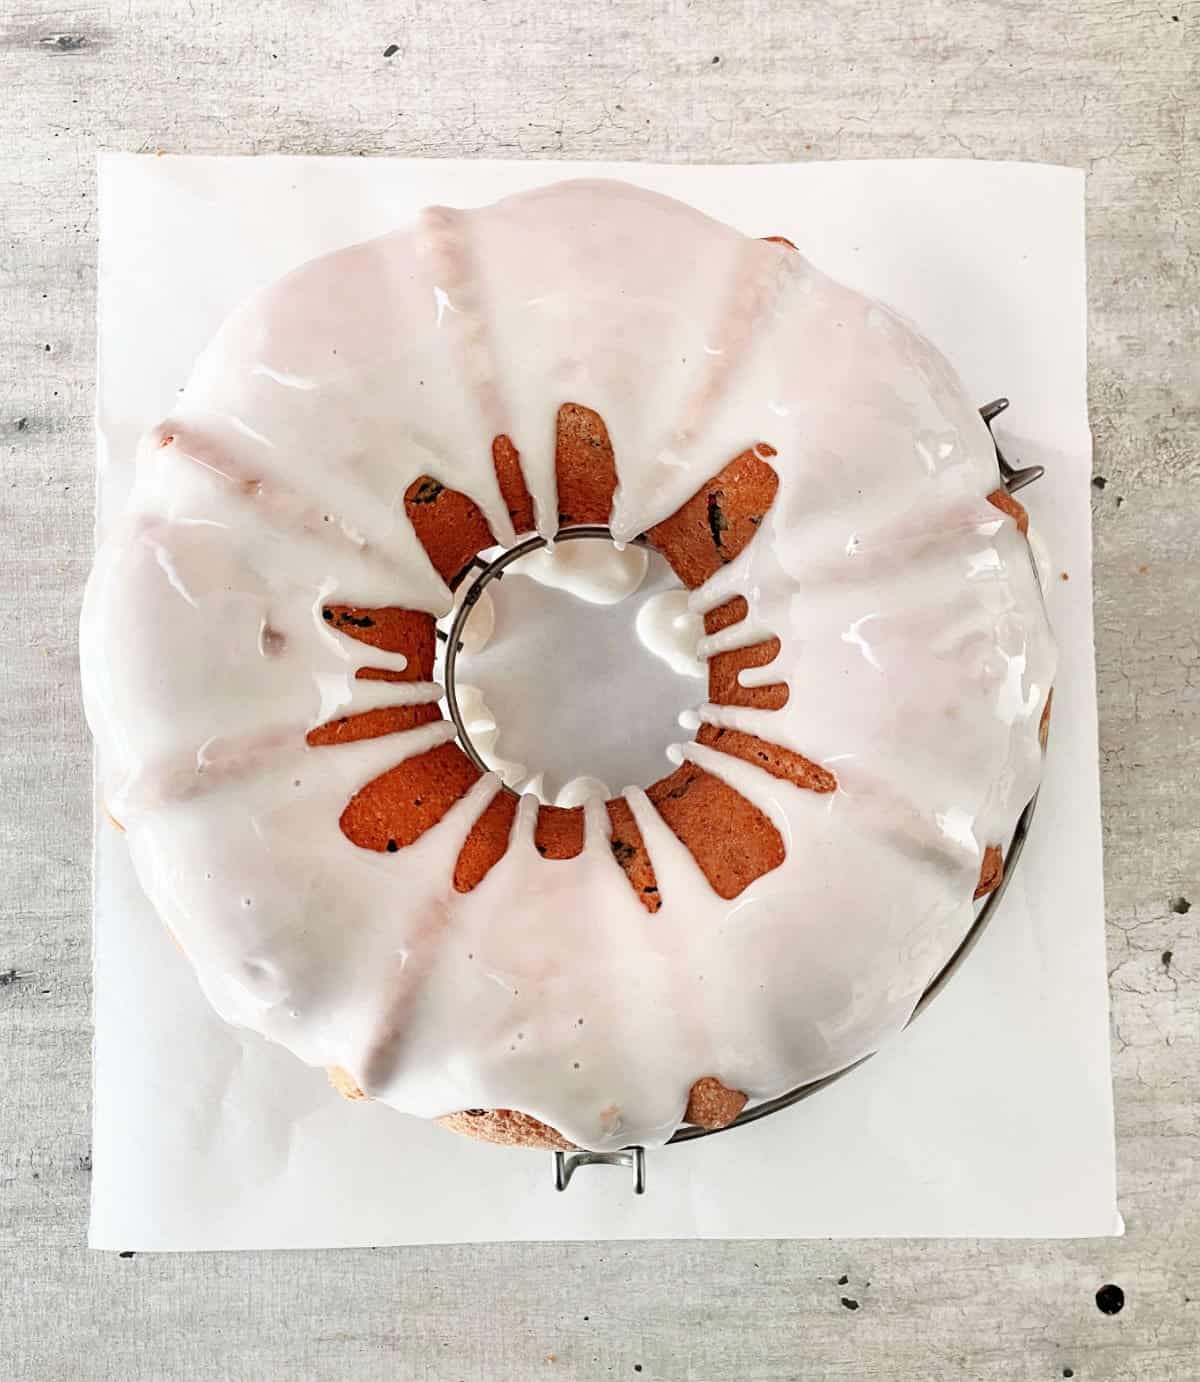 Glazed bundt cake seen from the top on a white paper set on a grey surface.